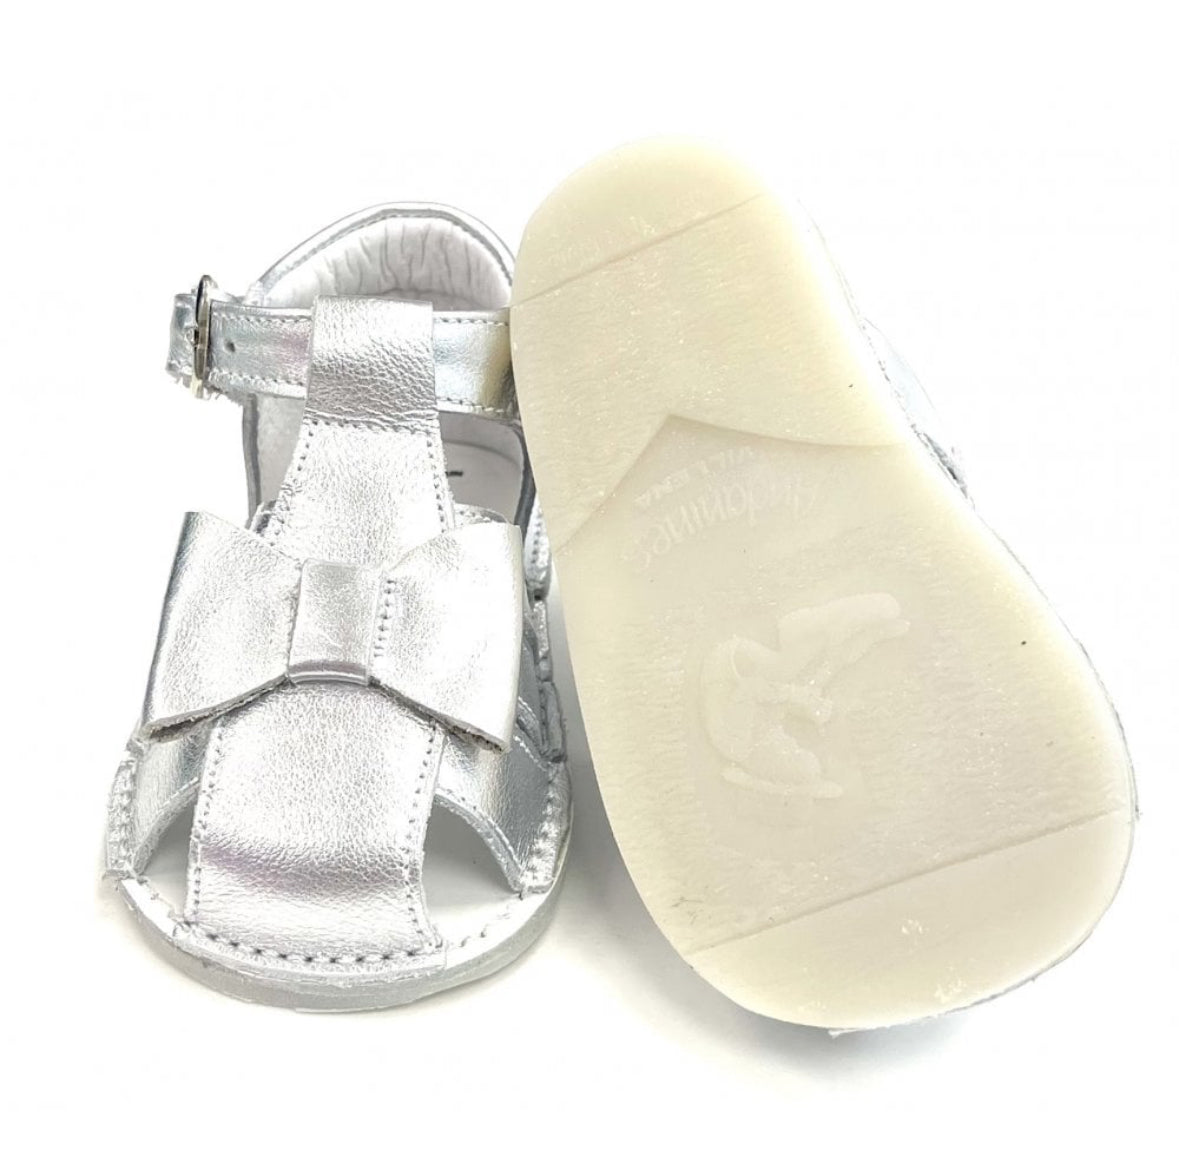 211077 Baby Girls Closed in Sandal with Bow Silver